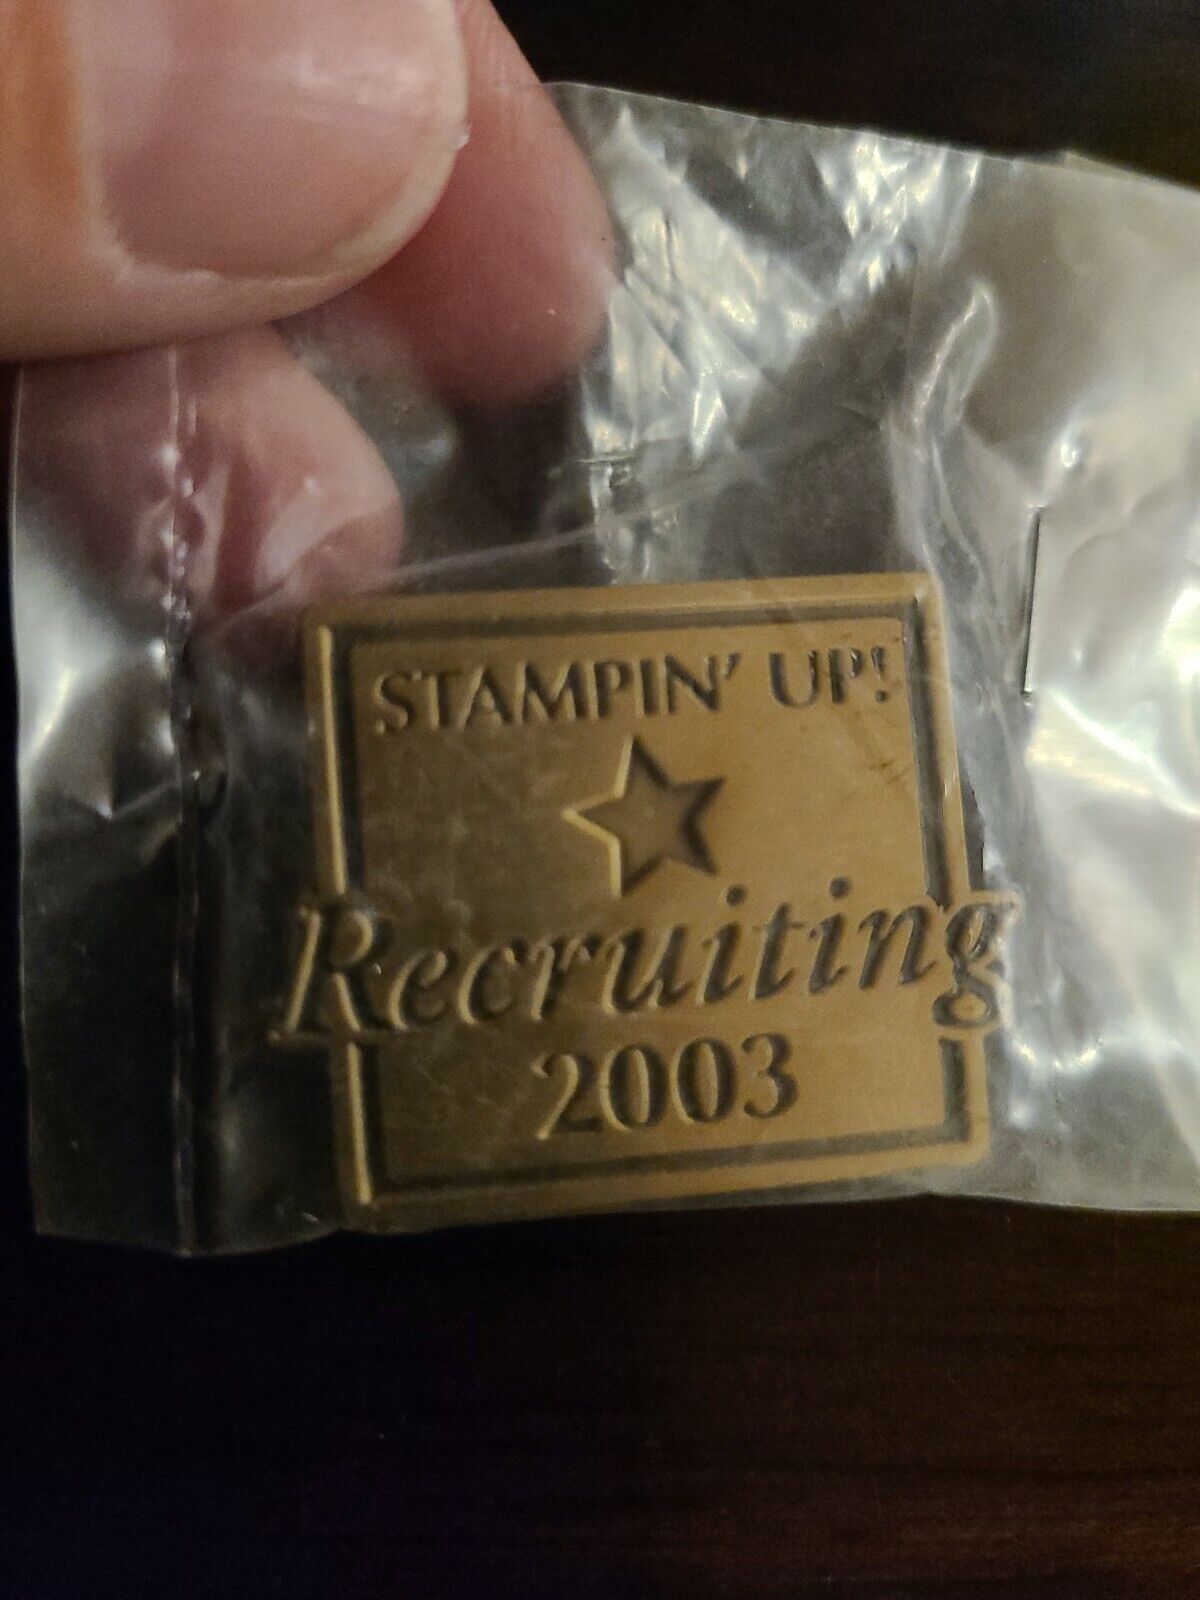 STAMPIN' Up Up 2003 Recruiting one star Lapel Pin Gold Tone Enamel Collectible